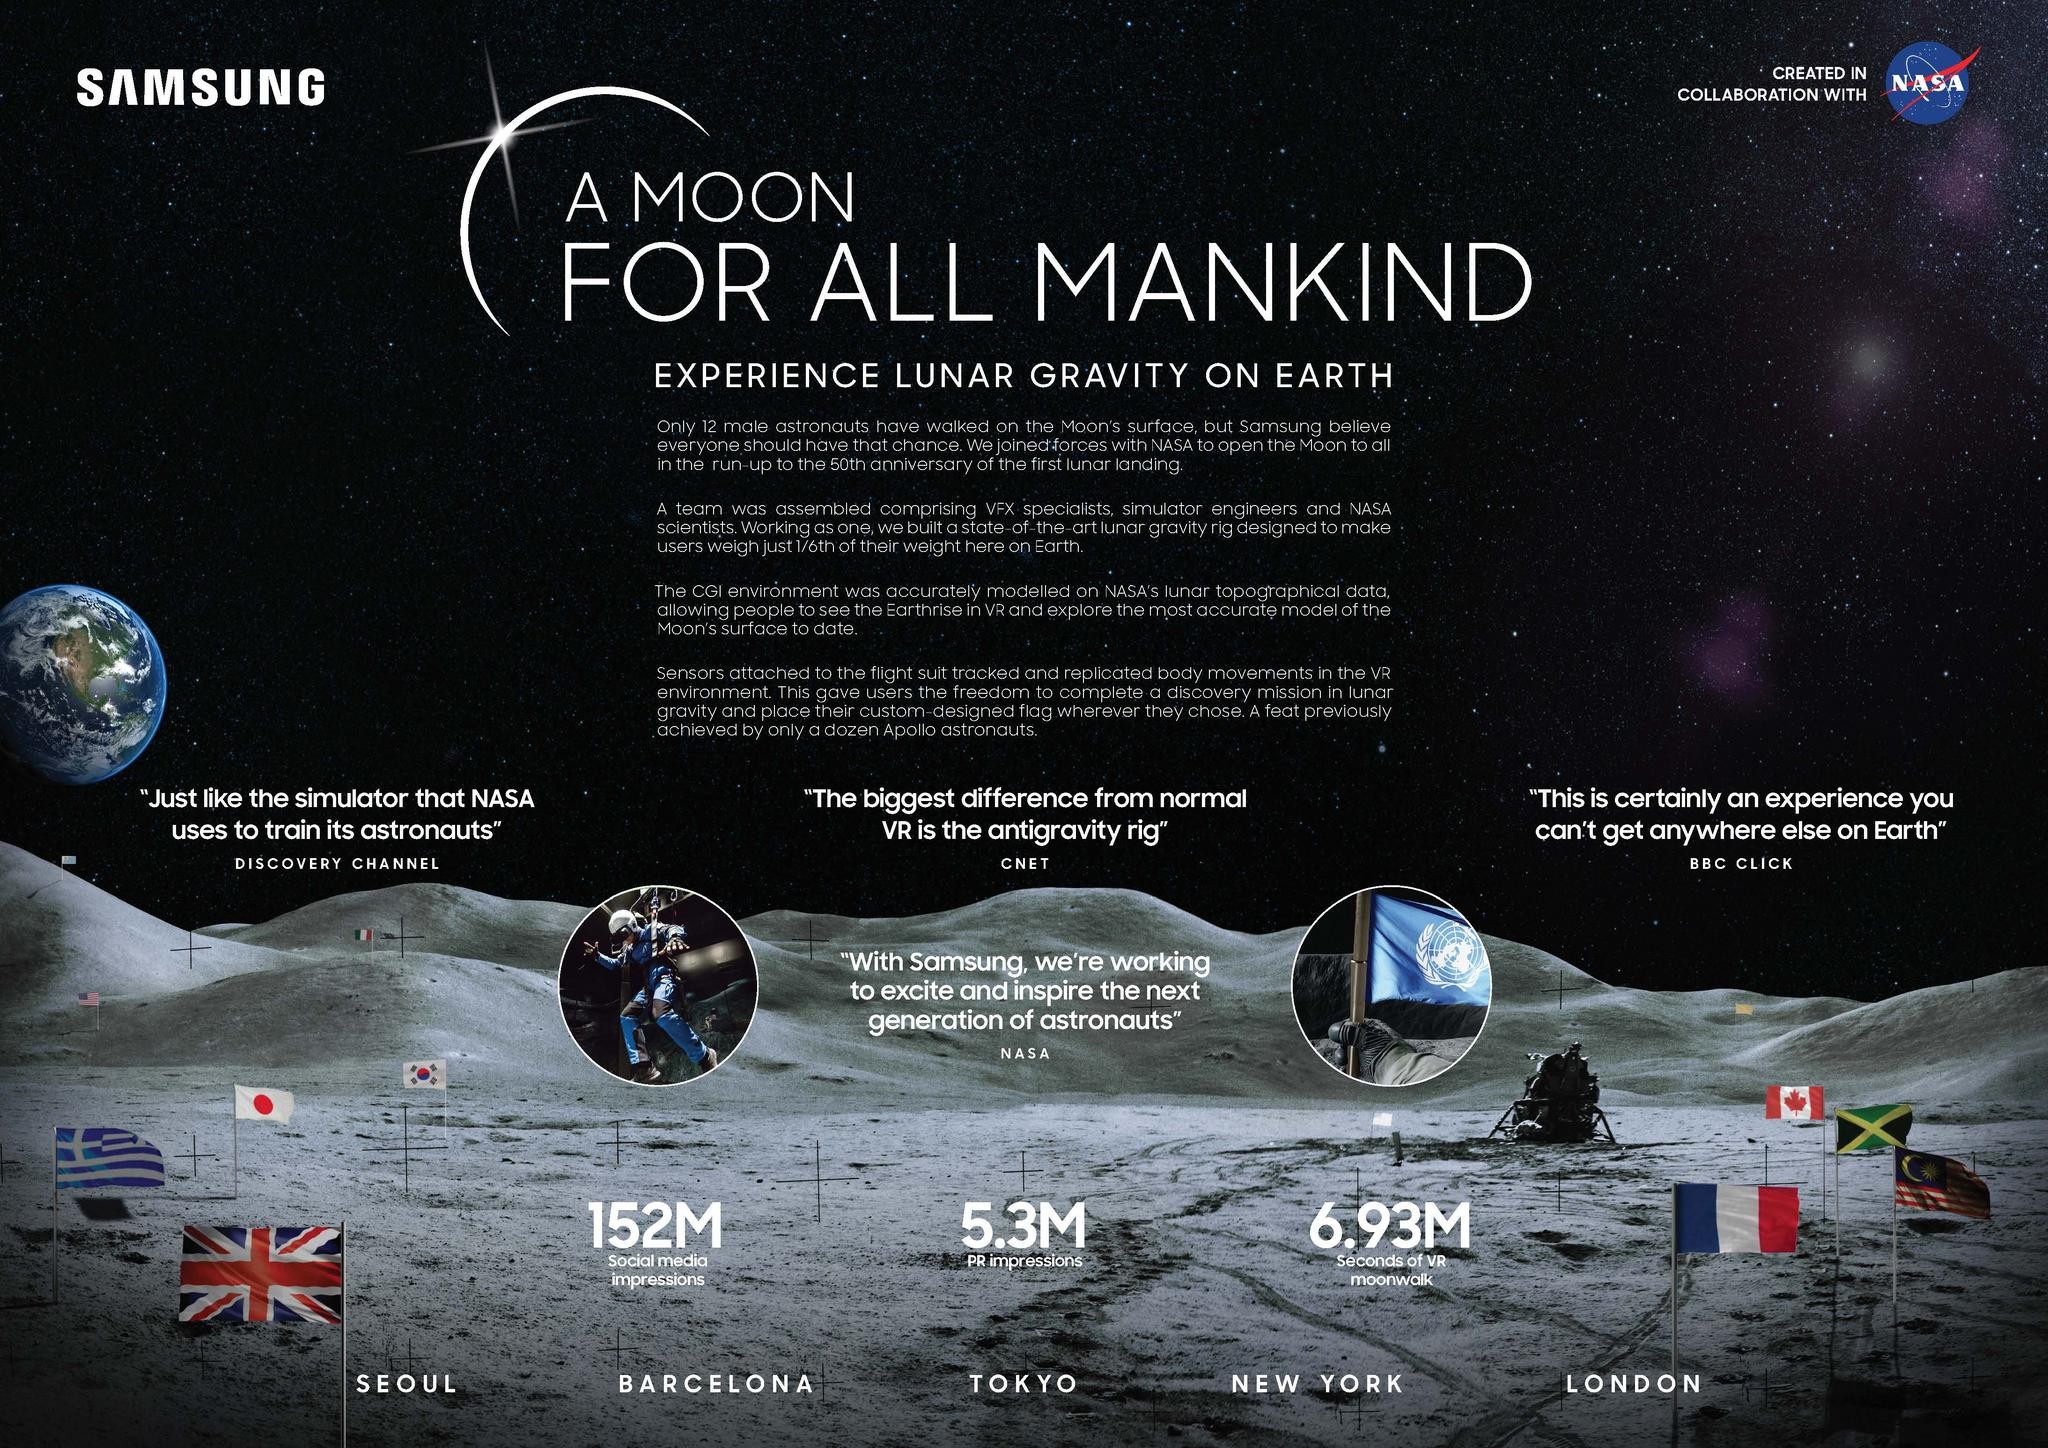 A Moon For All Mankind